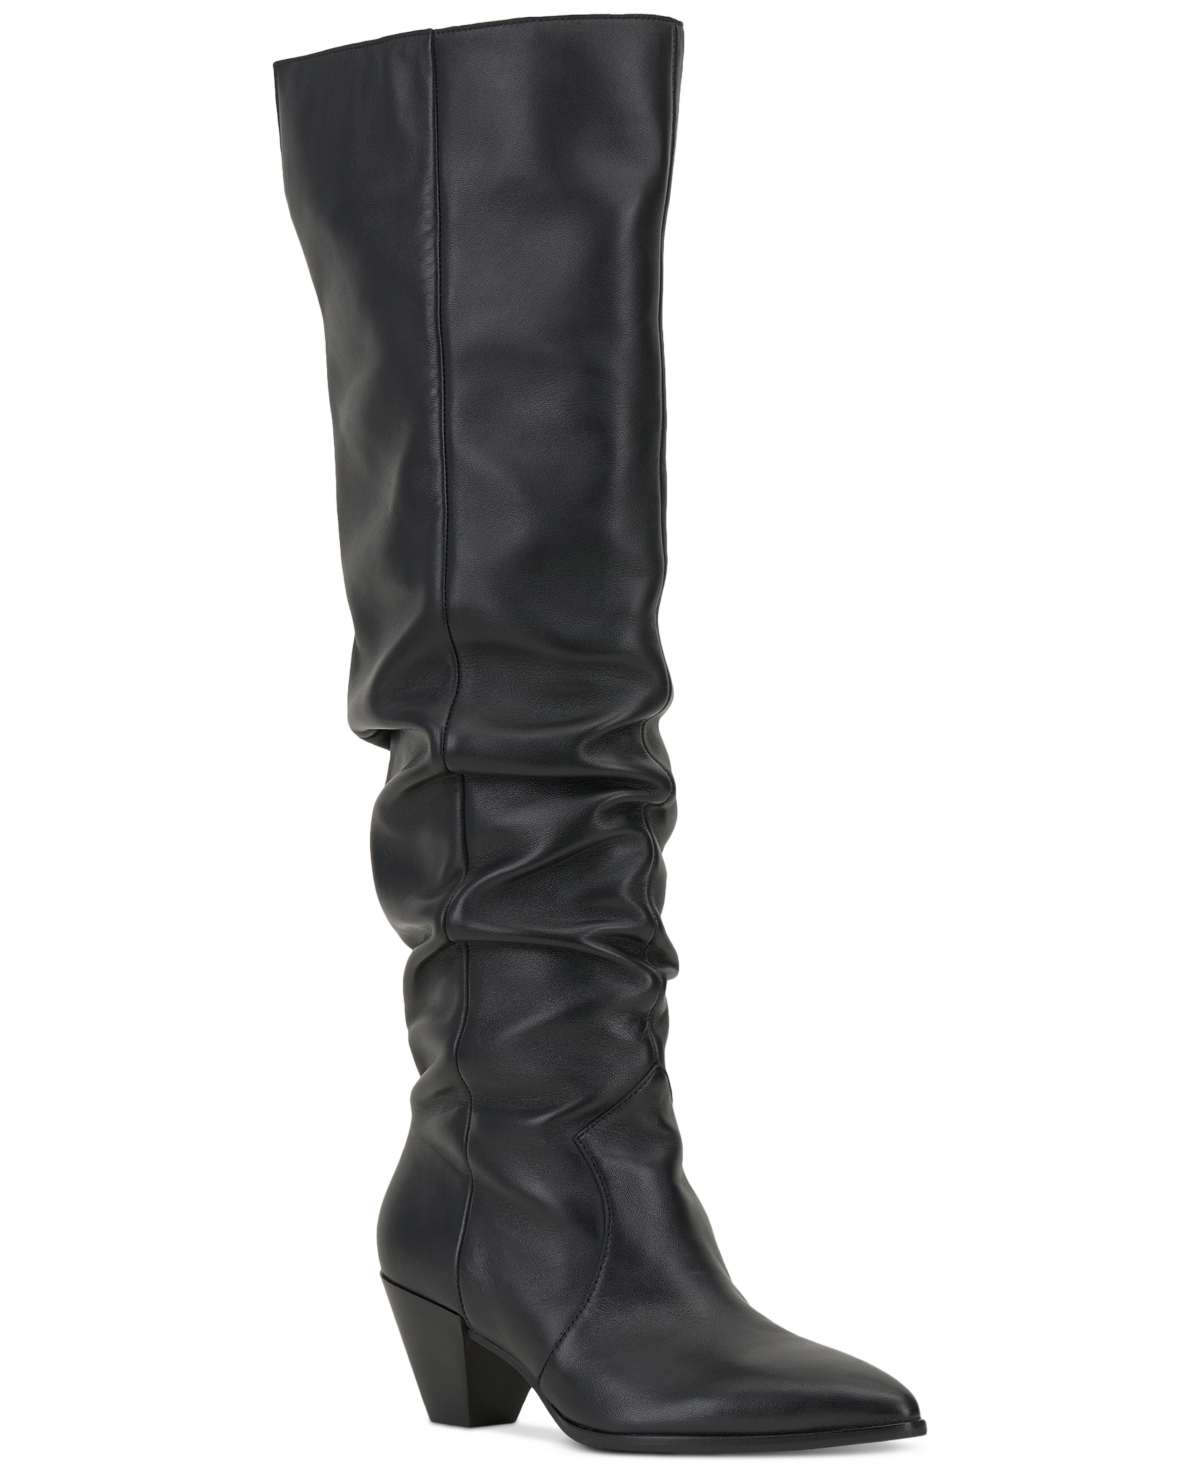 VINCE CAMUTO WOMEN'S SEWINNY SLOUCH KNEE-HIGH WIDE-CALF DRESS BOOTS